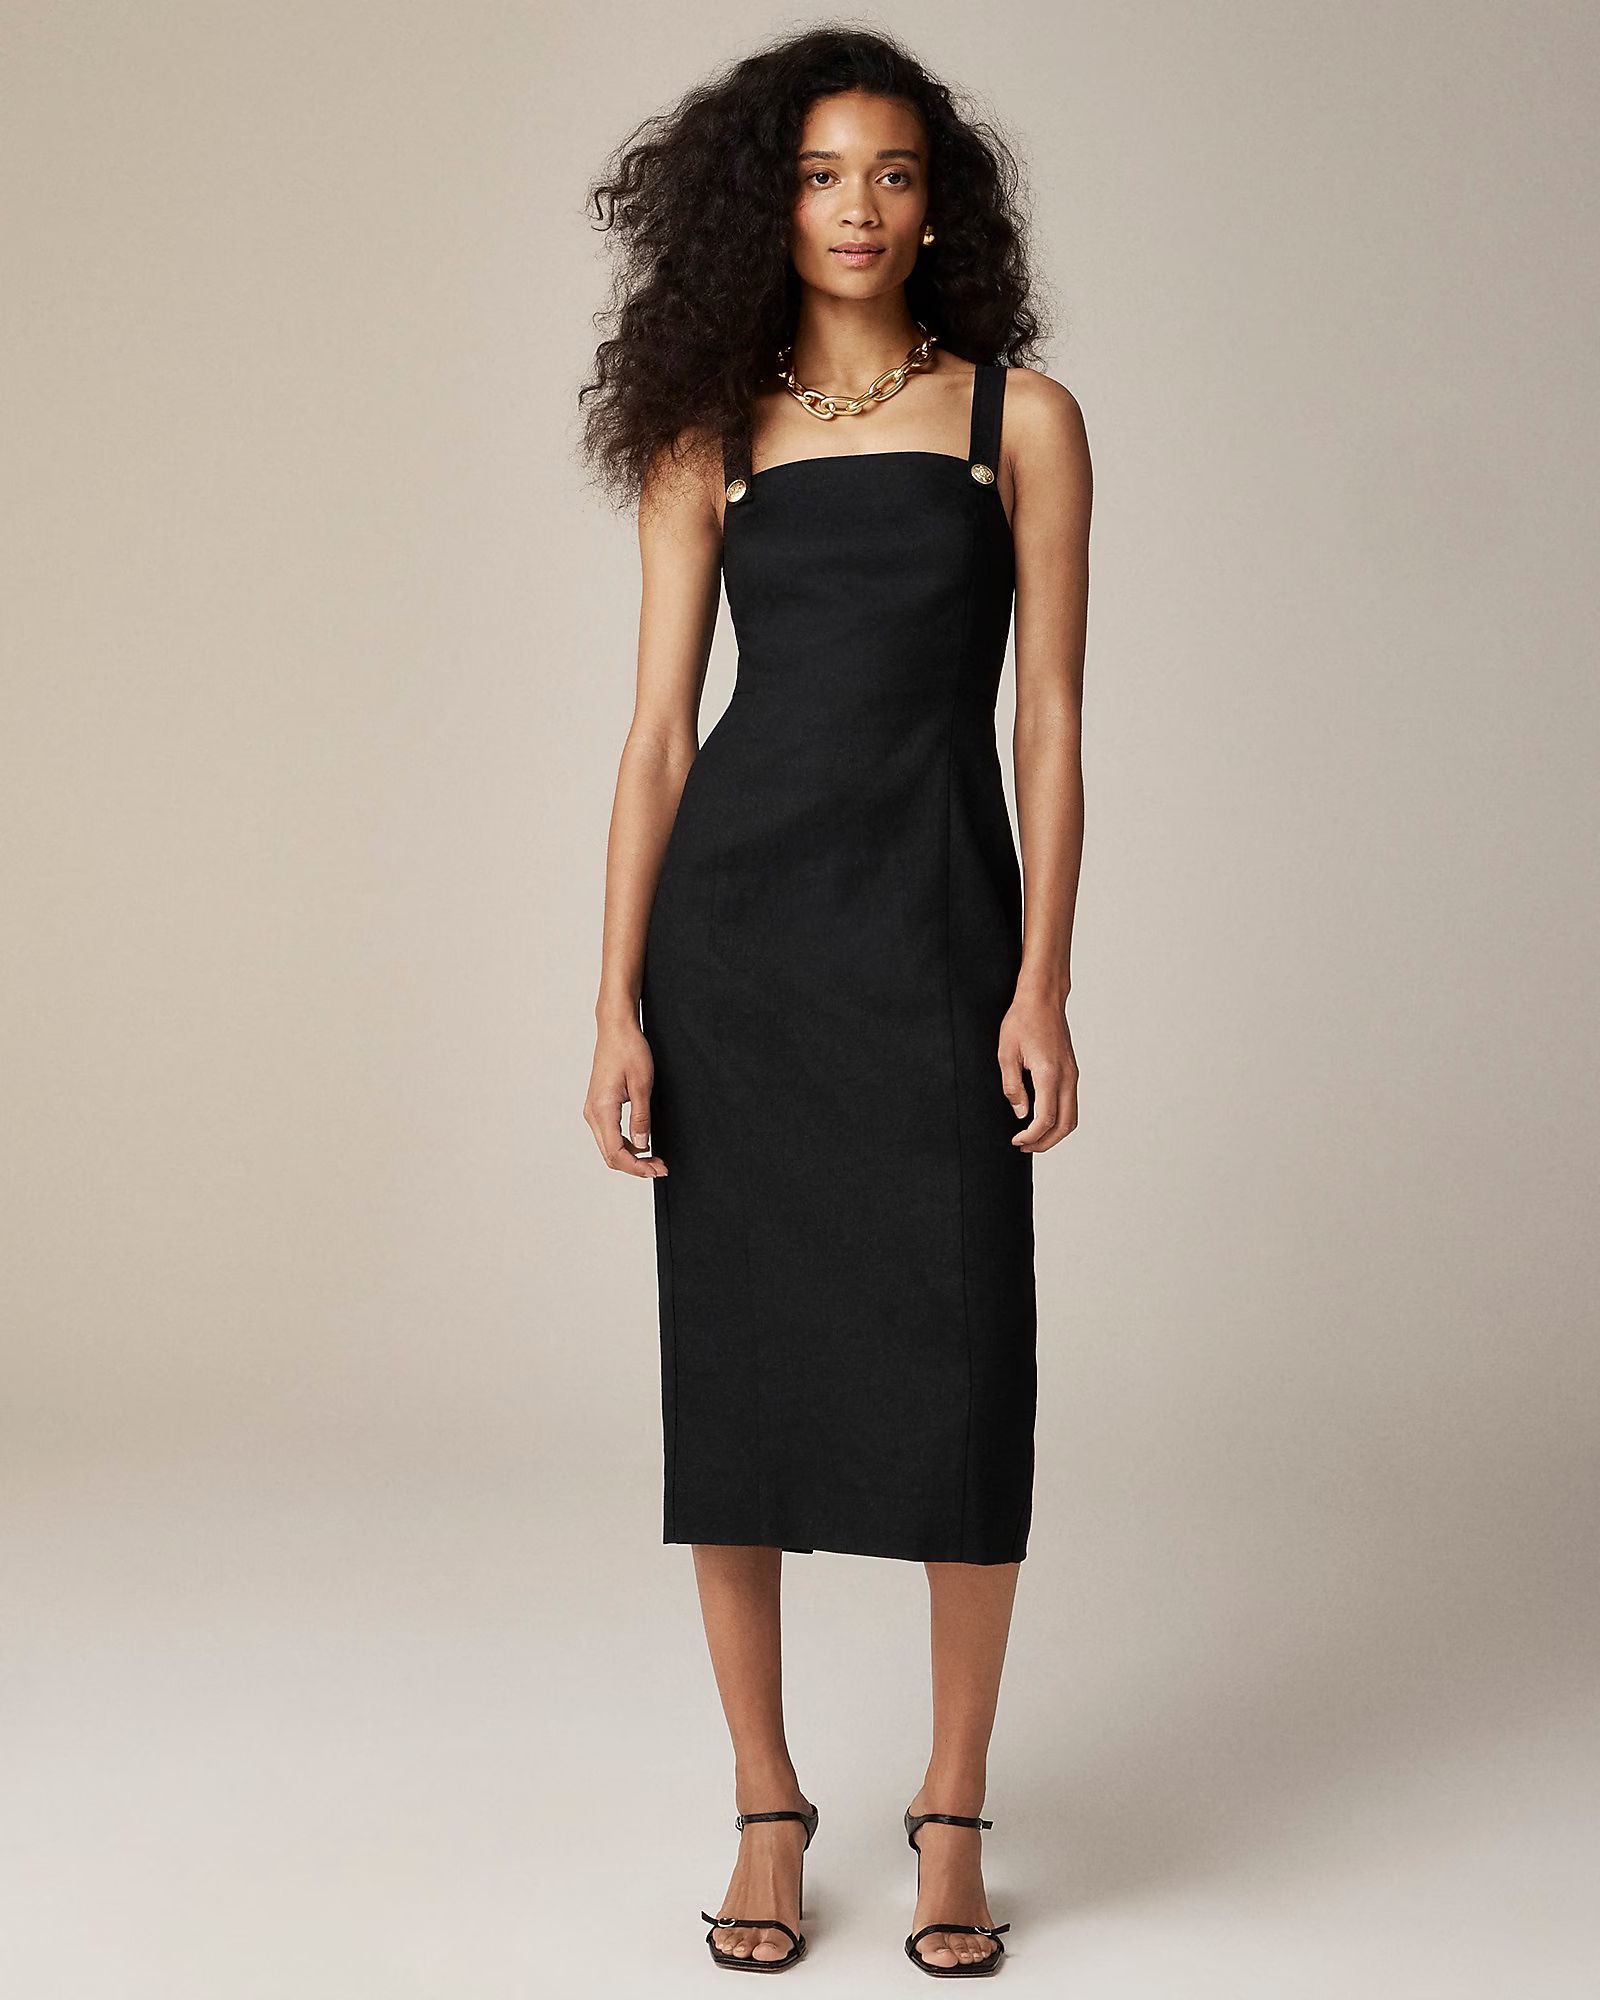 newStretch linen-blend sheath dress$228.0030% off full price with code SHOP30BlackSelect a sizeSi... | J.Crew US